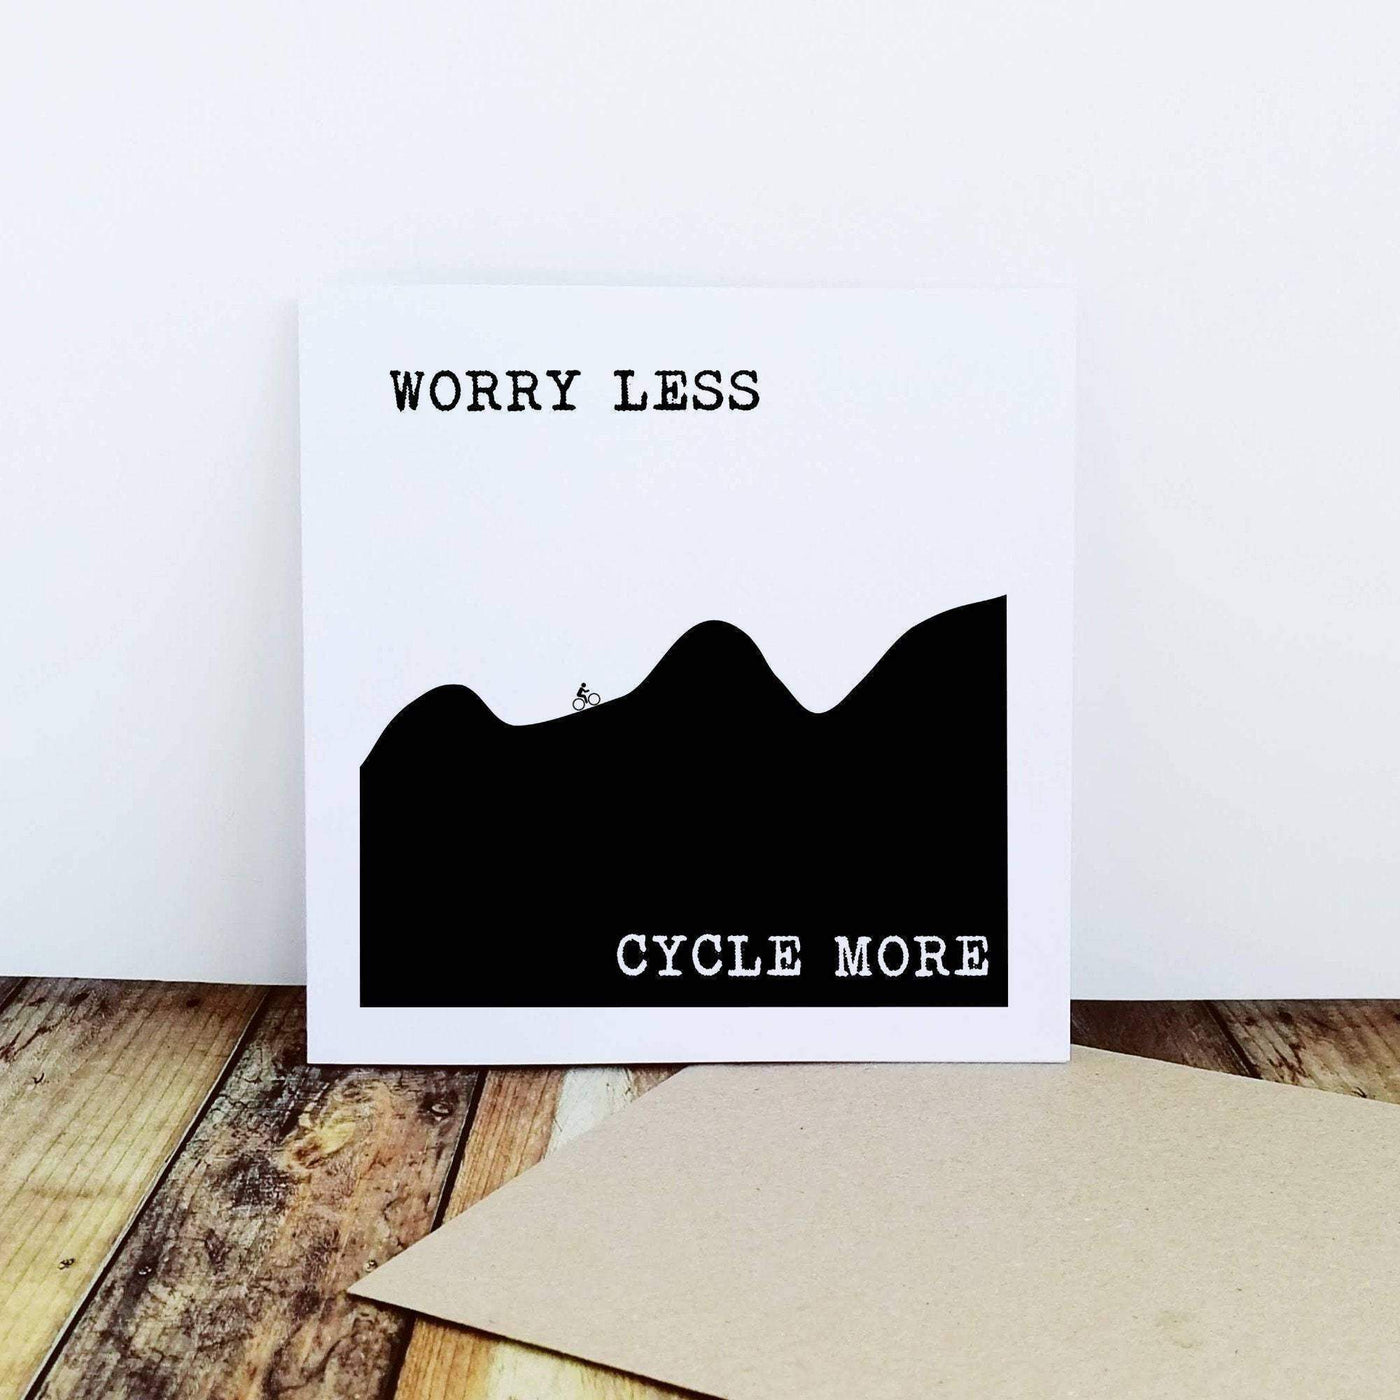 Worry Less Cycle More - Greetings Card-Worry Less Design-Cycling,Greetings-Card